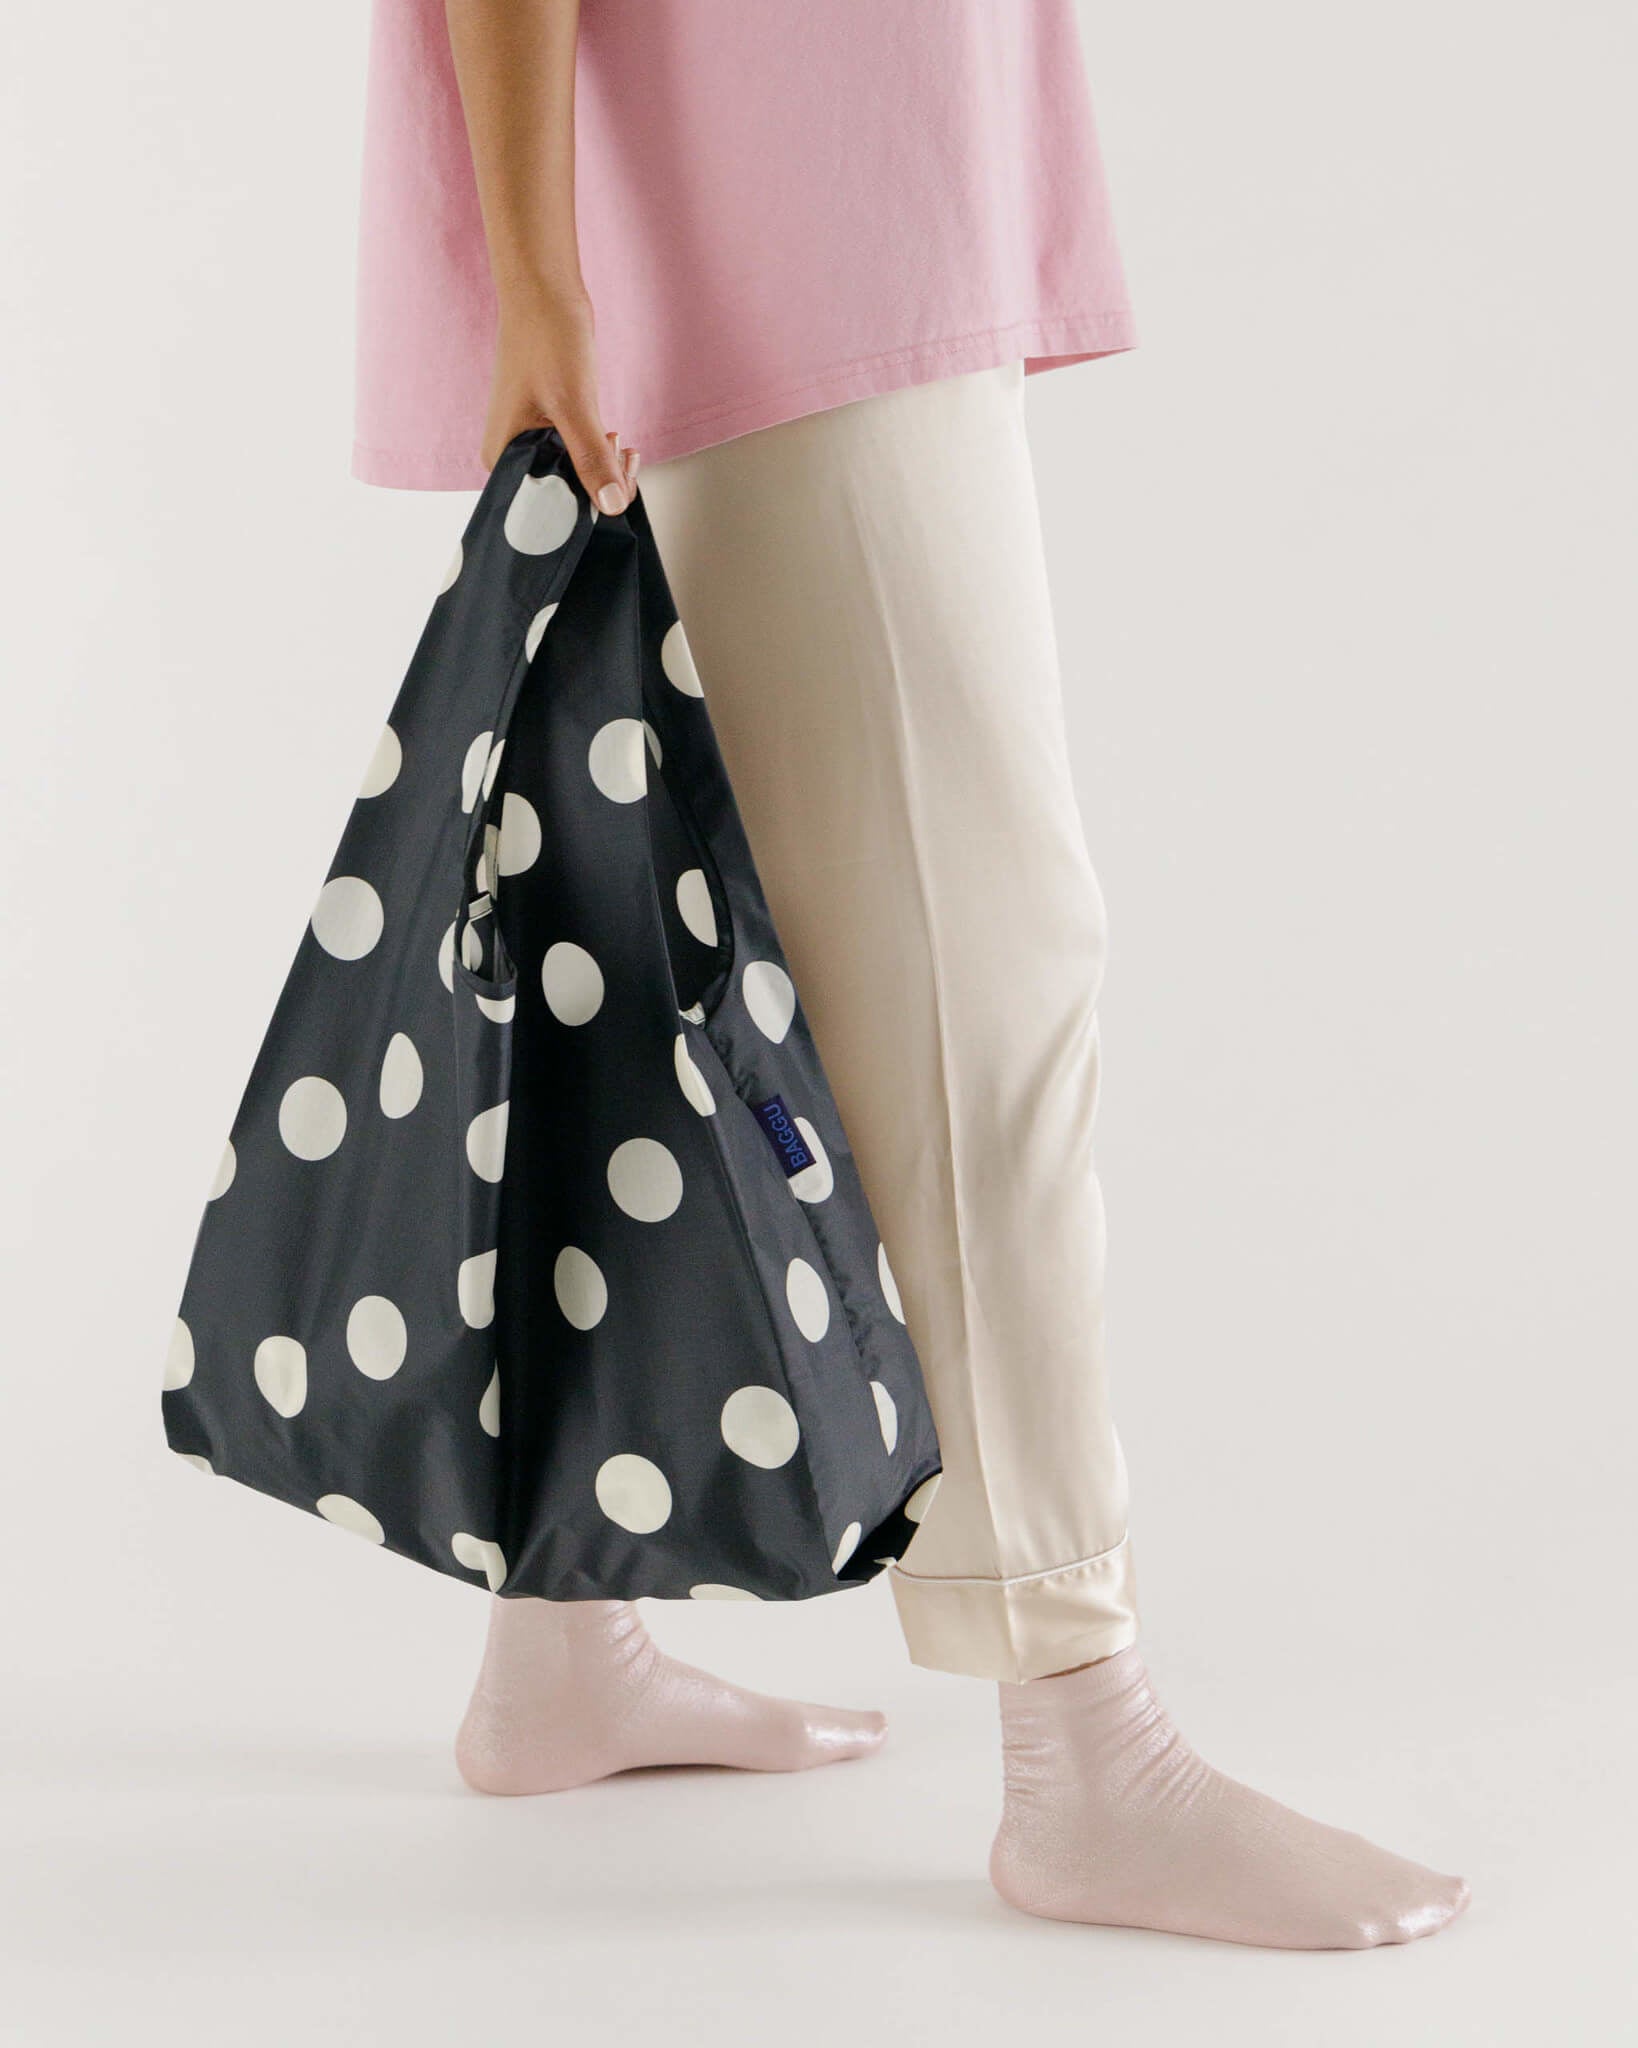 Person walking with full reusable shopping bag with white polka-dot pattern